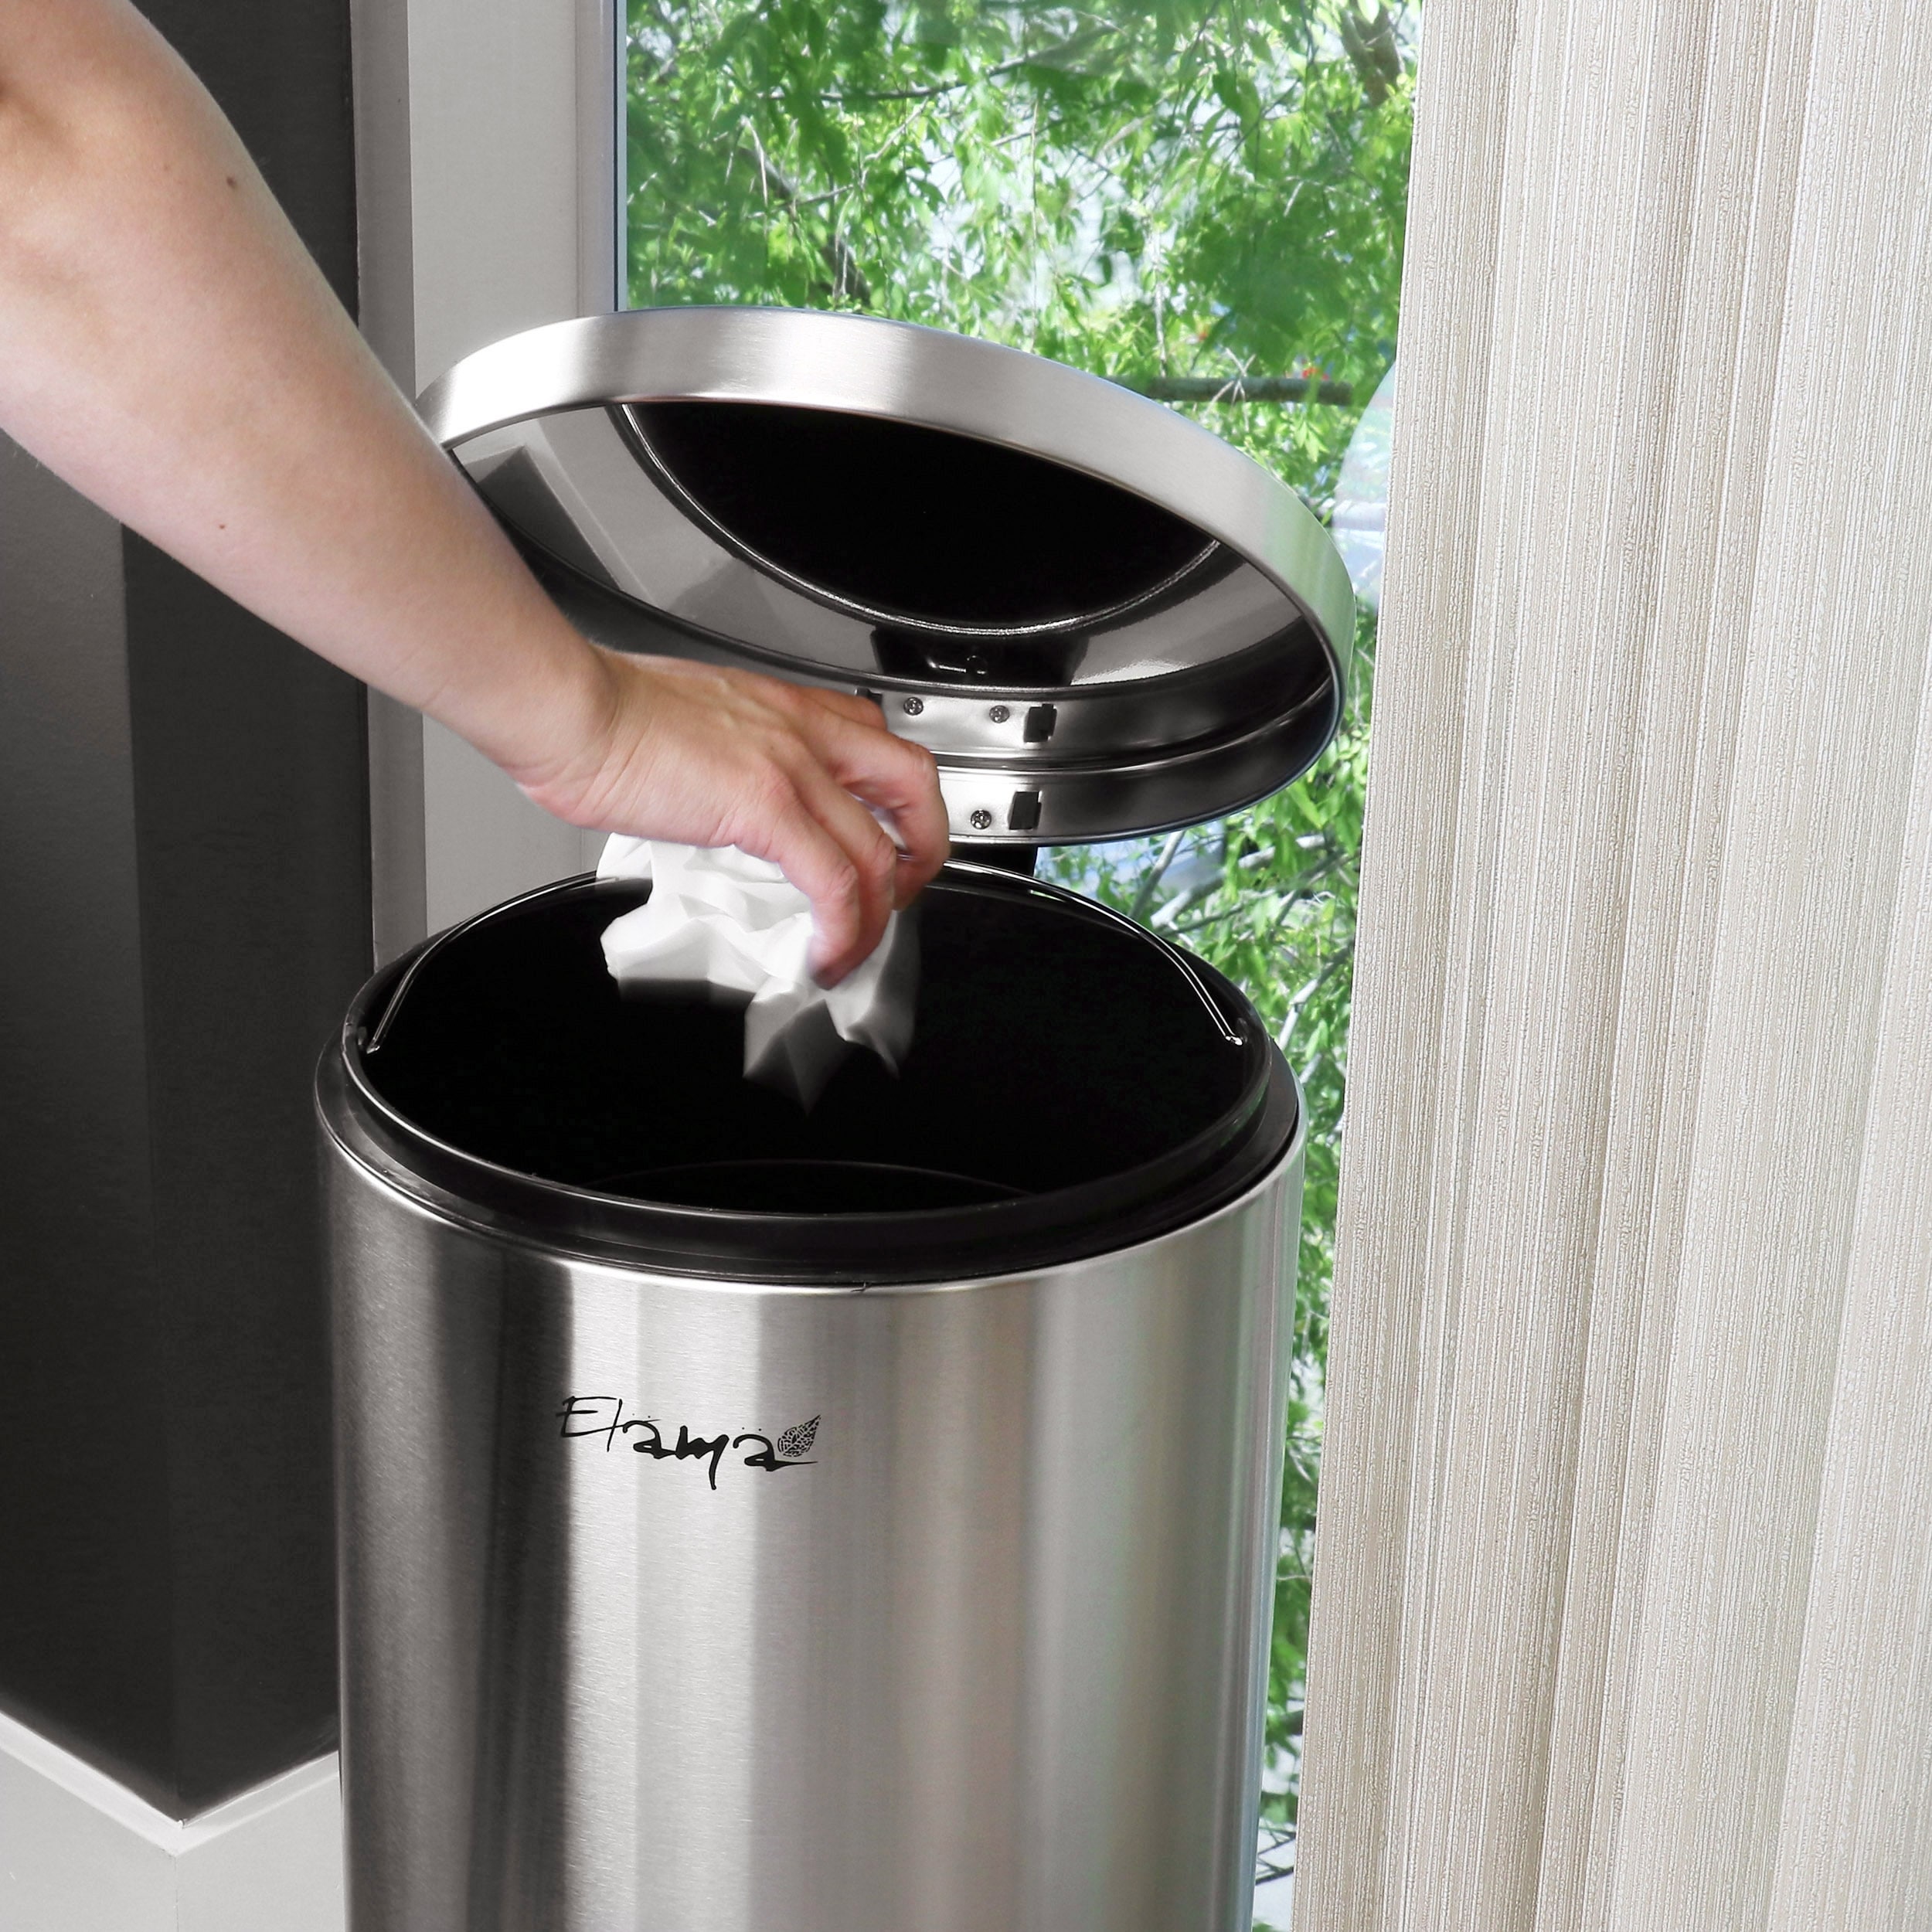 Innovaze 8 Gal.30 Liter and 1.3 Gal.5 Liter Rectangular Stainless Steel Step-On Trash Can Set for Kitchen and Bathroom